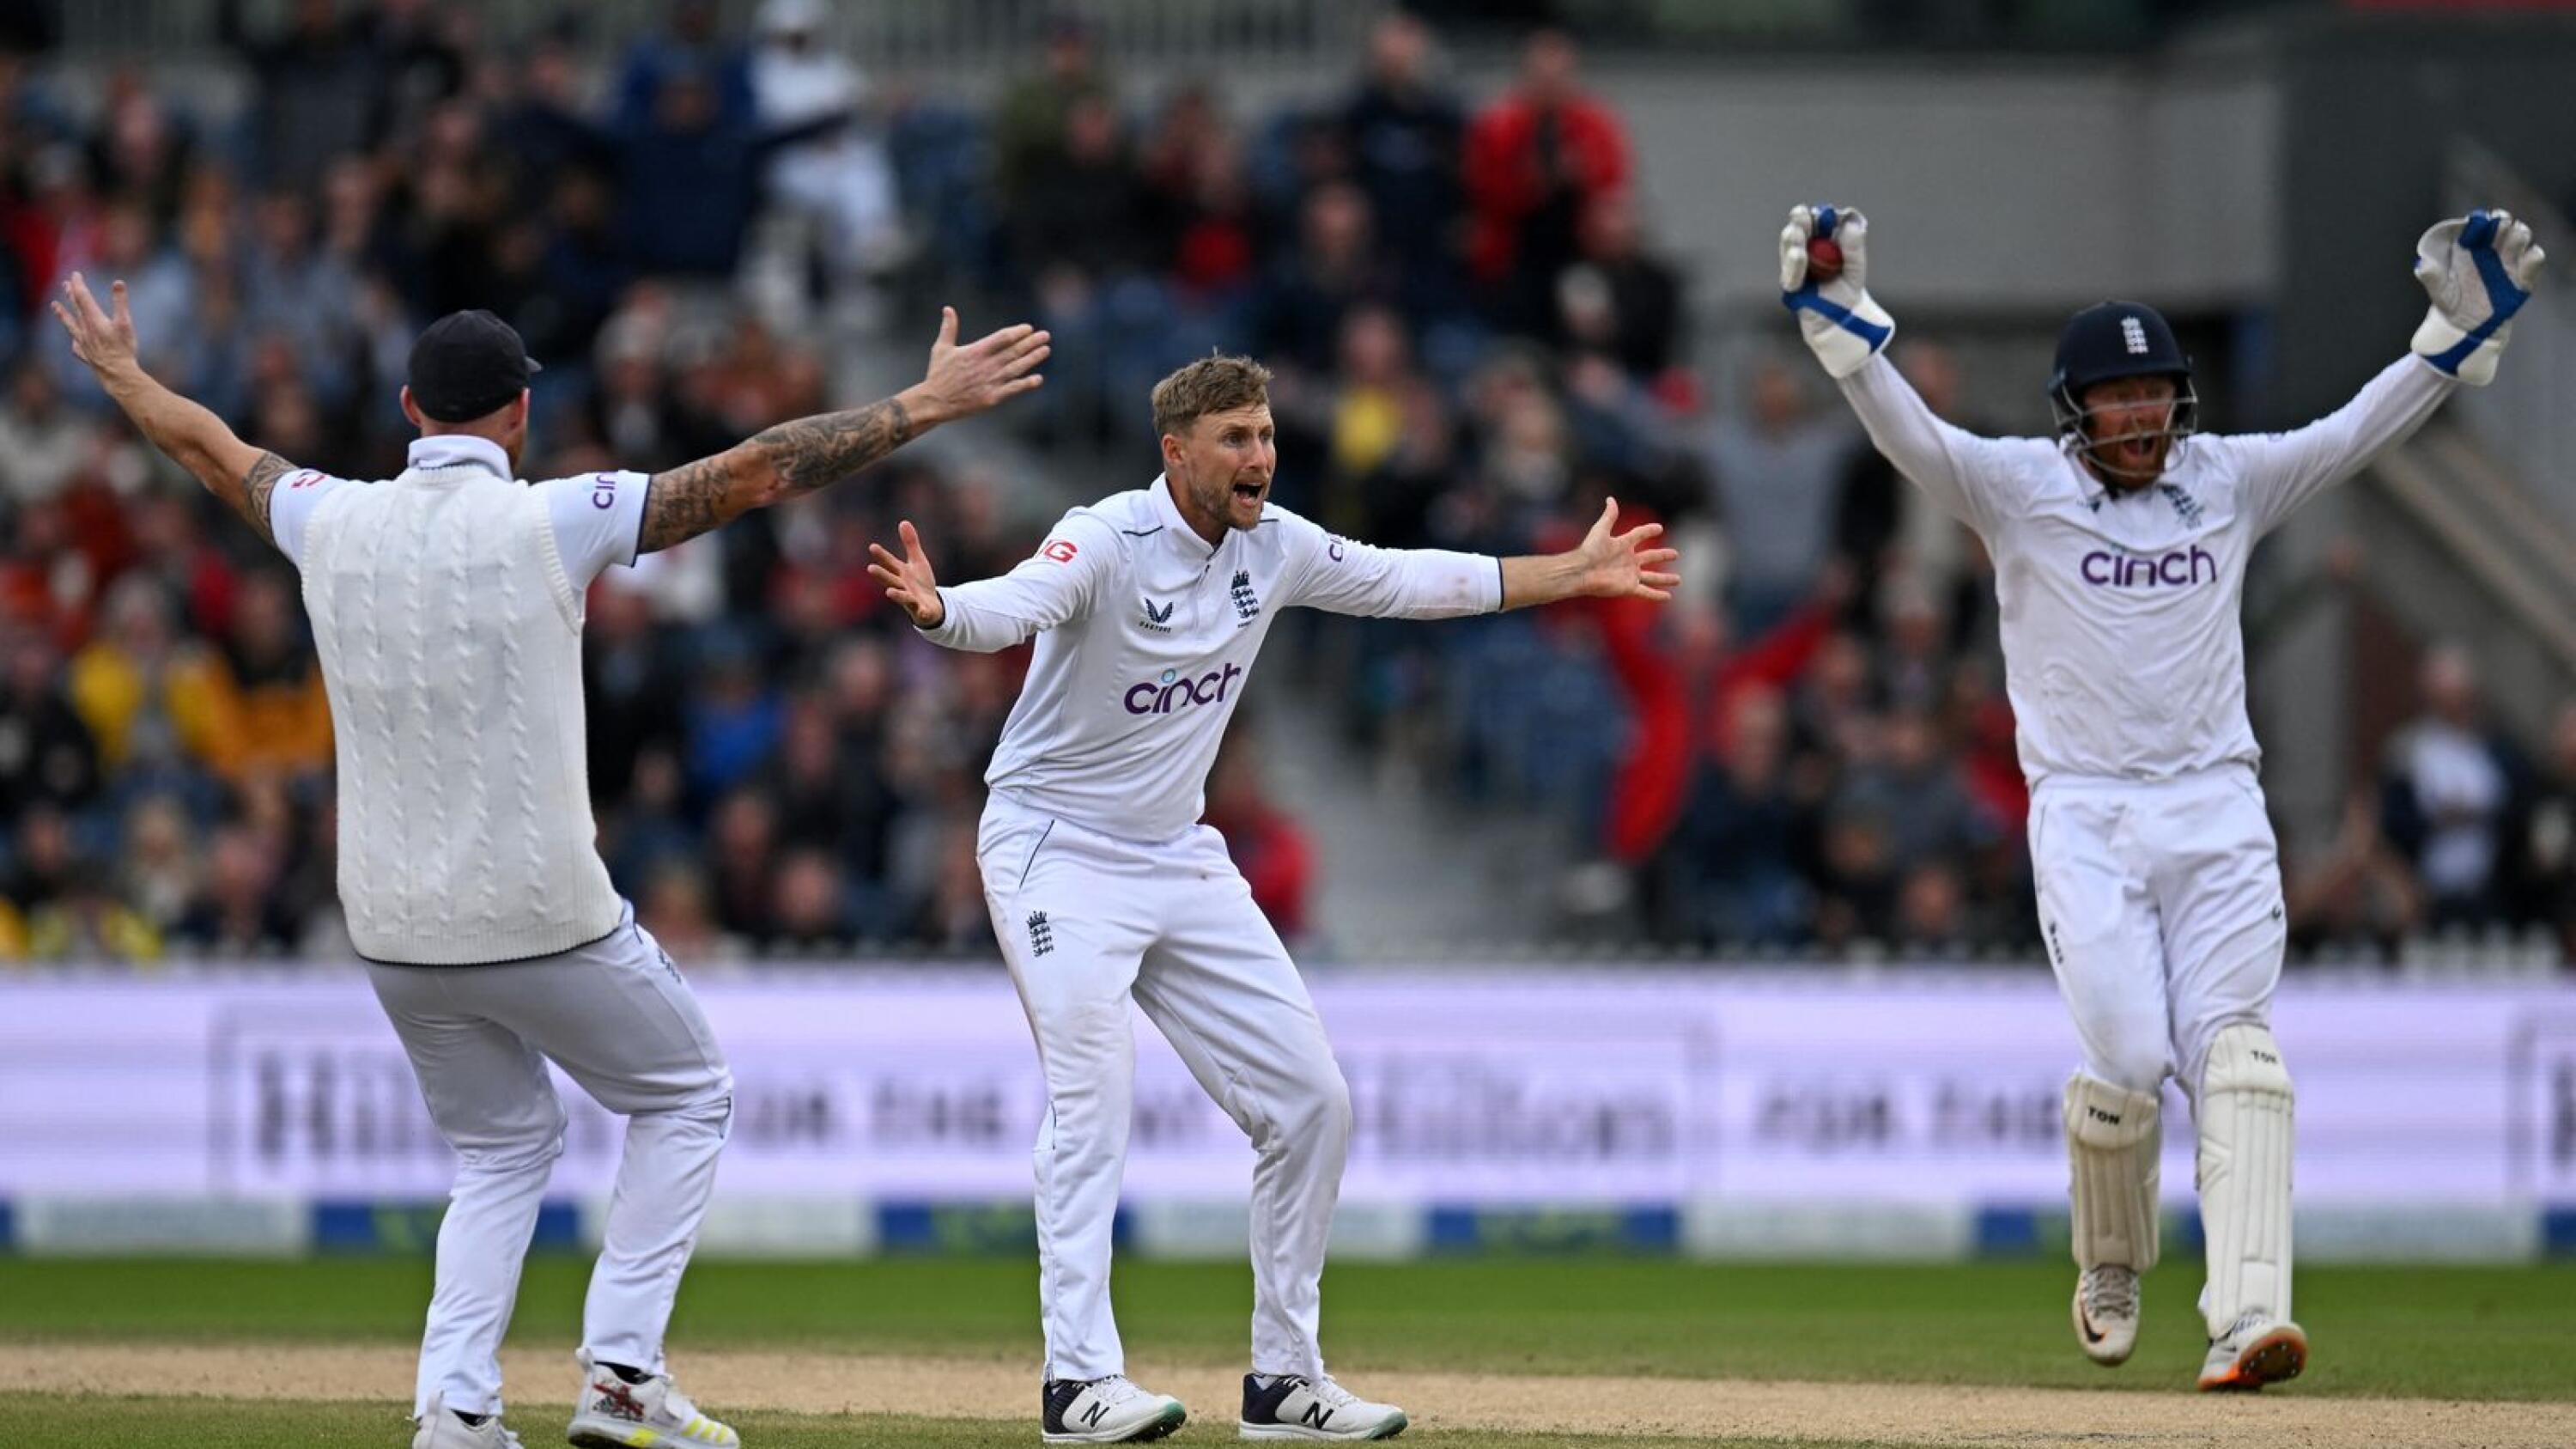 England's Joe Root appeals for the wicket of Australia's Marnus Labuschagne on day four of the fourth Ashes cricket Test match at Old Trafford on Saturday